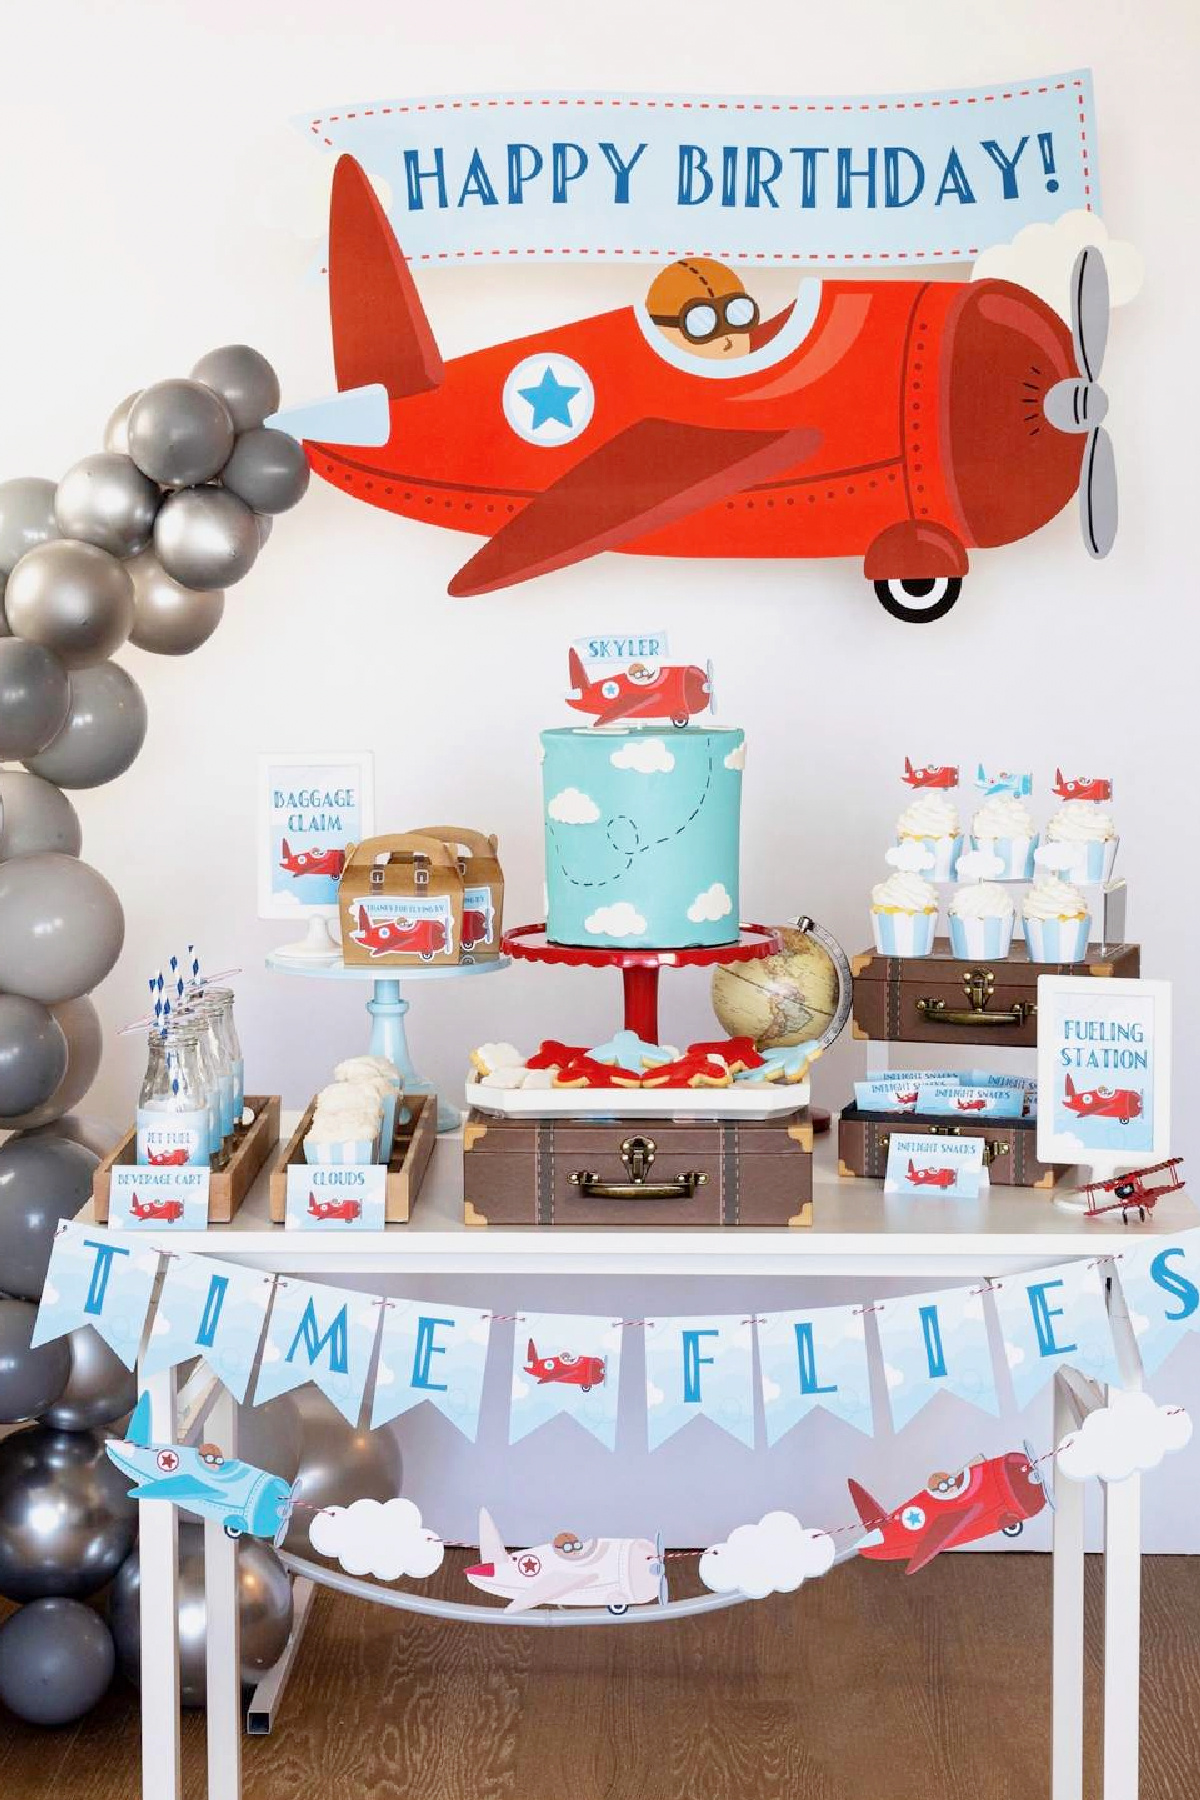 Airplane Birthday Party